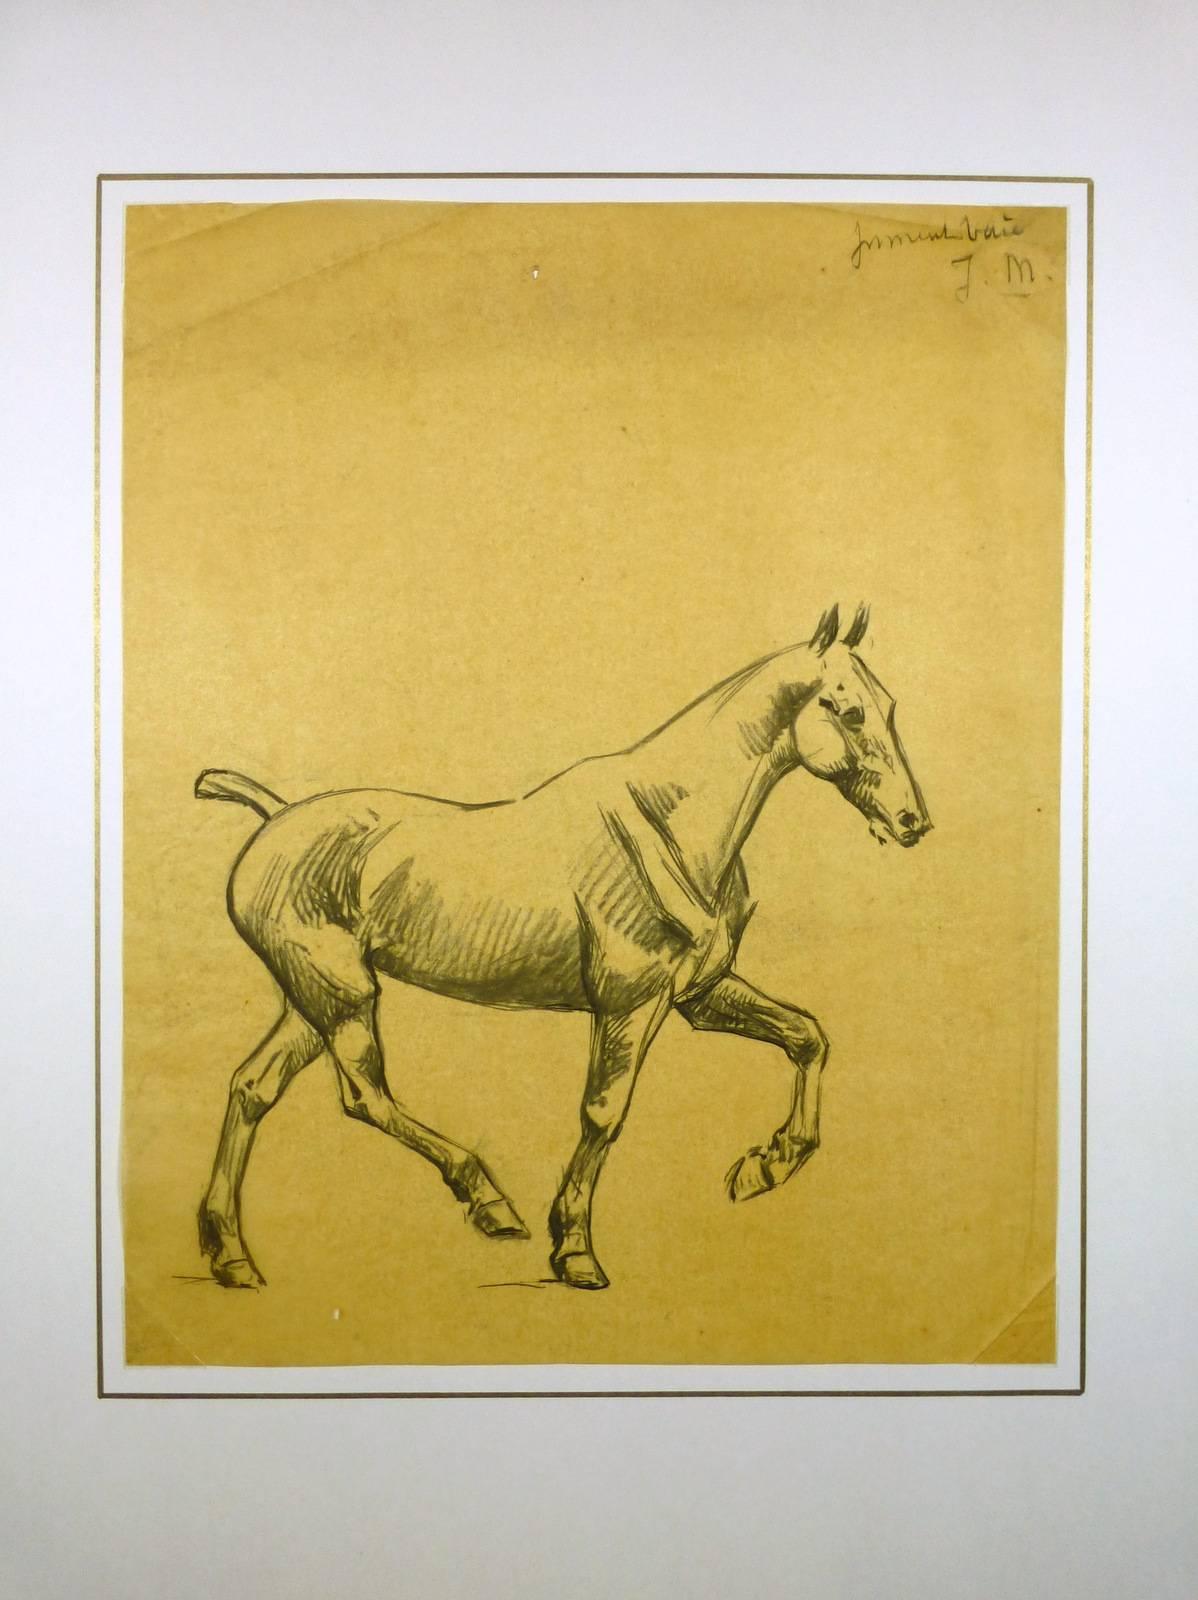 Turn of the century drawing of a horse in pencil by French artist J. Marchand, circa 1900. Signed upper right.  

Original artwork on paper displayed on a white mat with a gold border. Mat fits a standard-sized frame. Archival plastic sleeve and